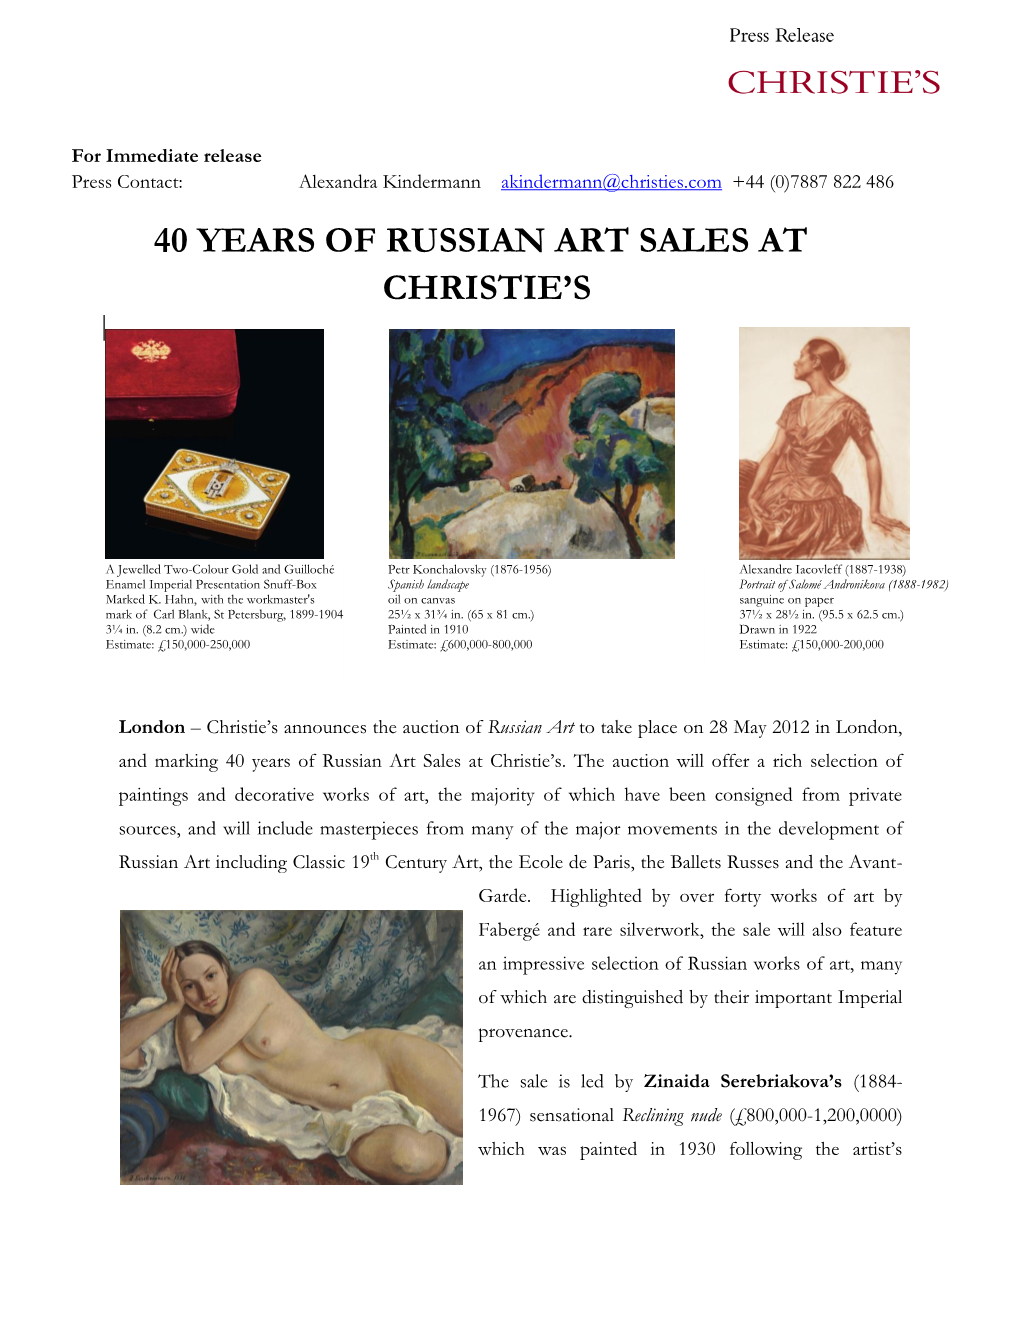 40 Years of Russian Art Sales at Christie's